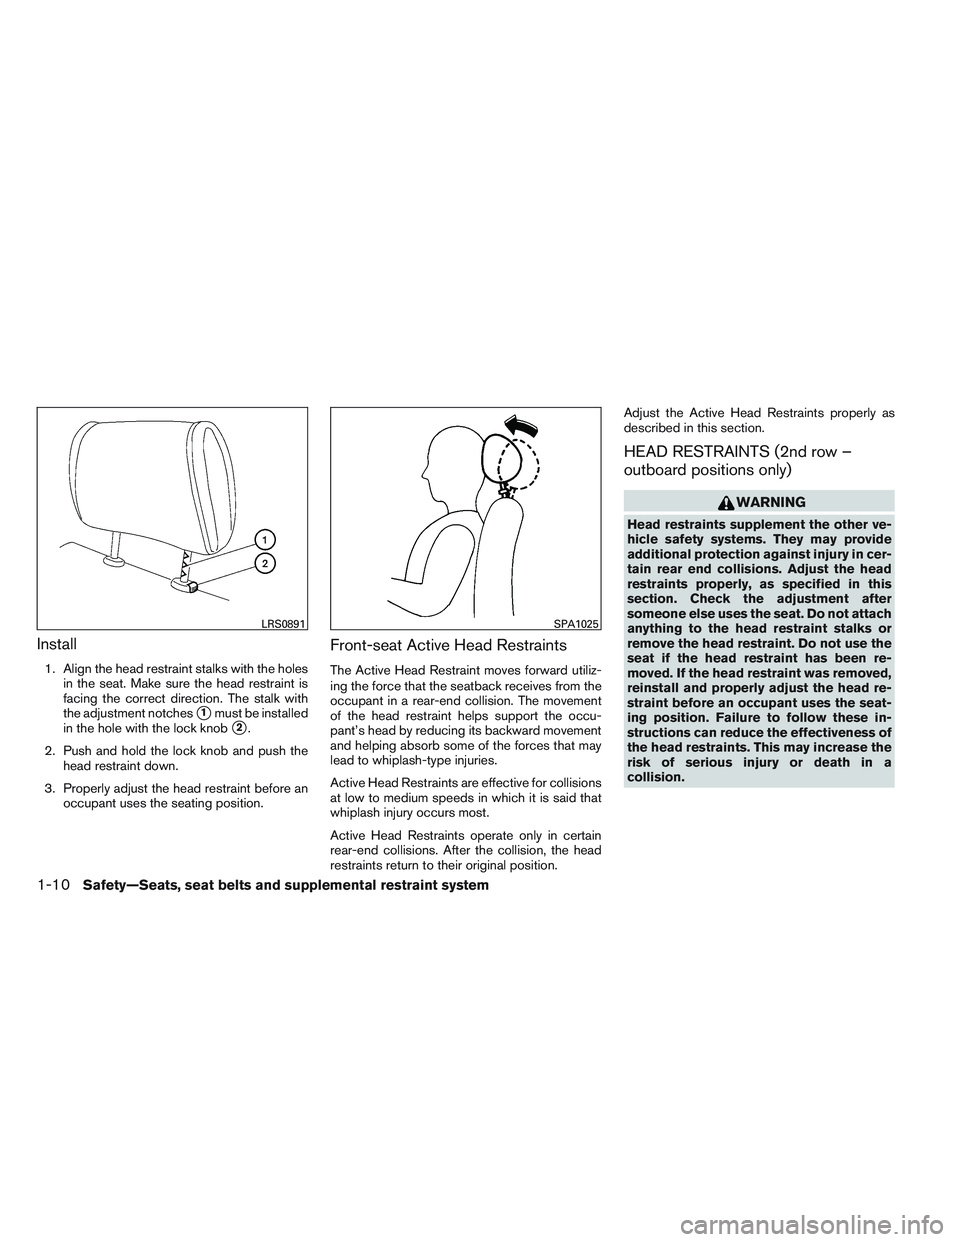 NISSAN FRONTIER 2012  Owner´s Manual Install
1. Align the head restraint stalks with the holesin the seat. Make sure the head restraint is
facing the correct direction. The stalk with
the adjustment notches
1must be installed
in the hol